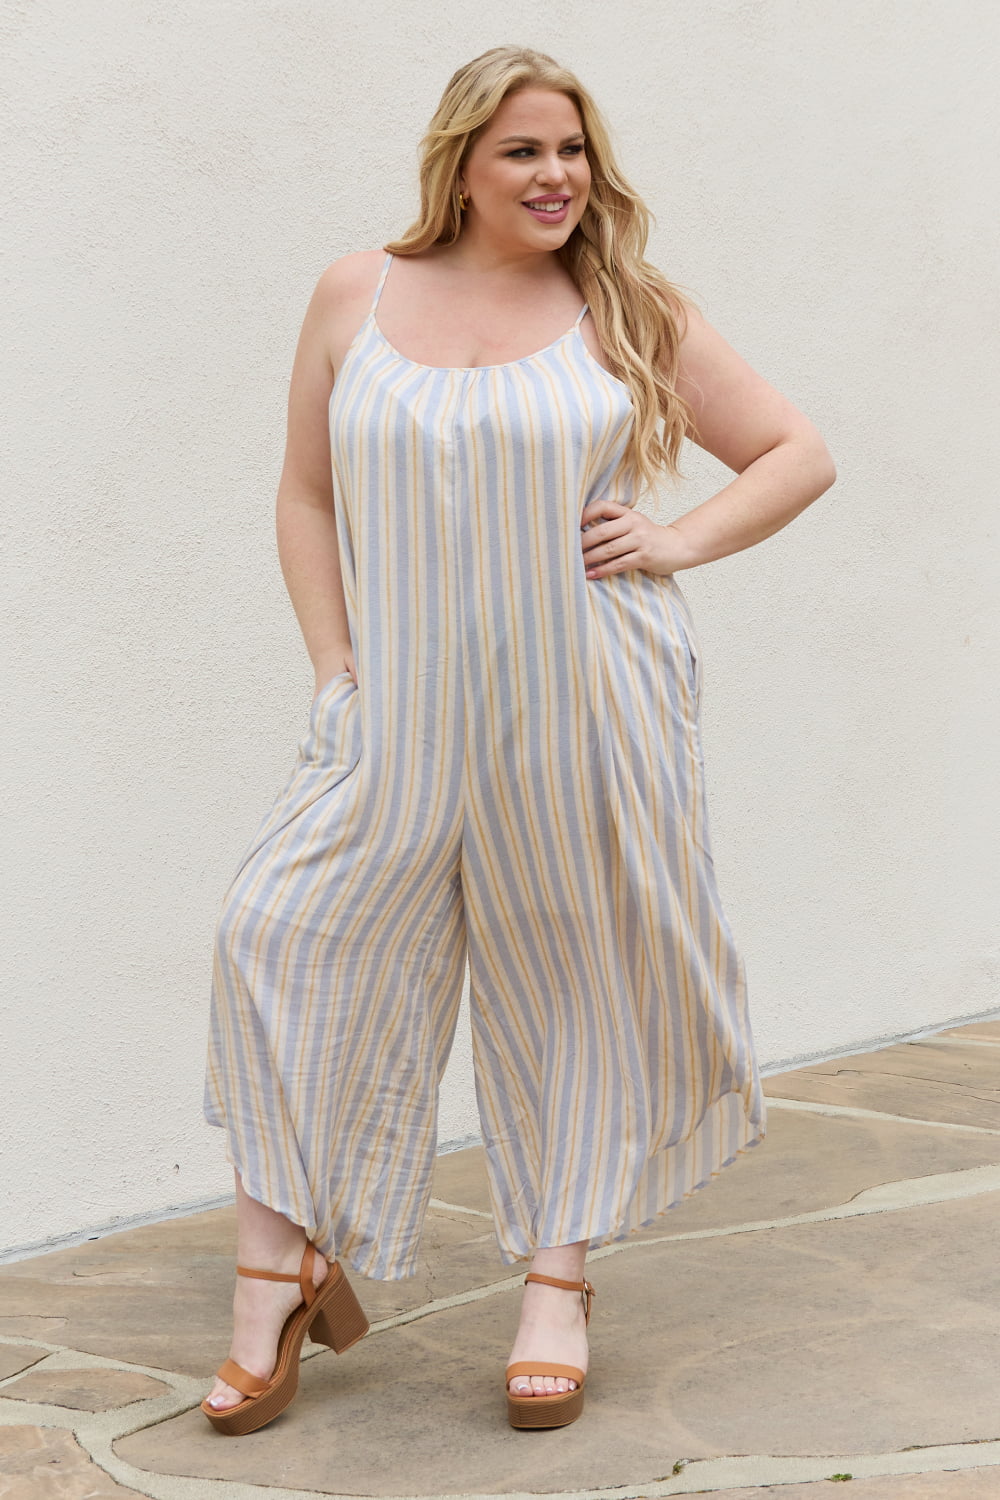 HEYSON Full Size Multi Colored Striped Jumpsuit with Pockets  Sunset and Swim Stripe S 